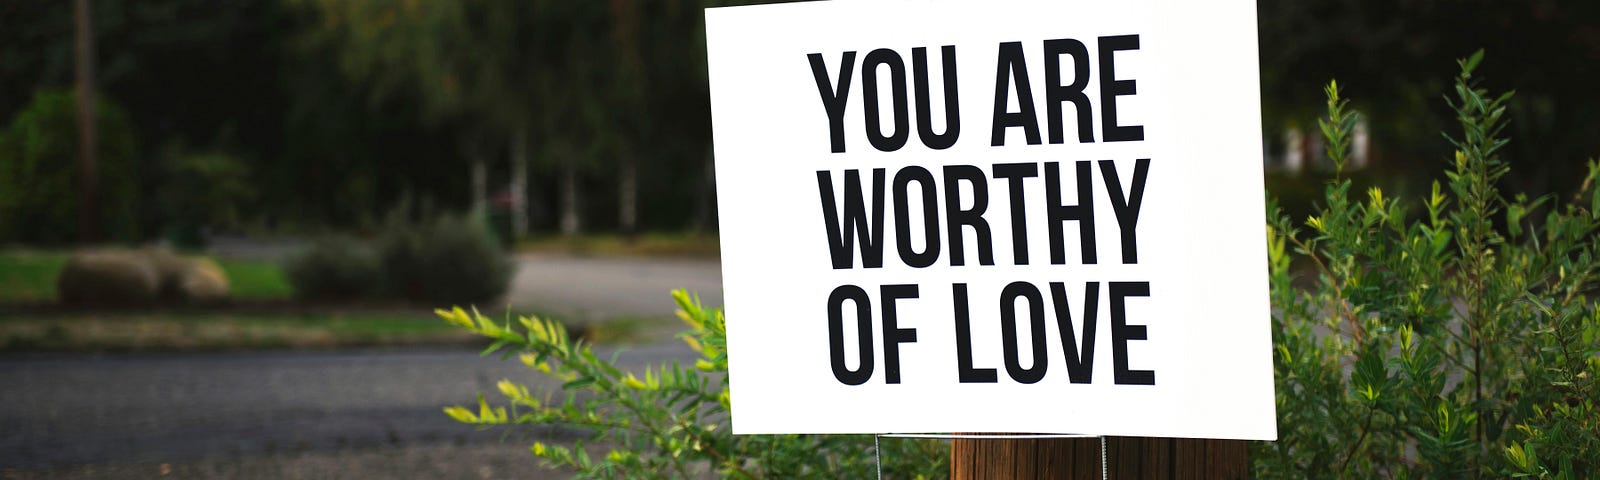 A simple sign put up on someone’s lawn. It says: You Are Worthy Of Love